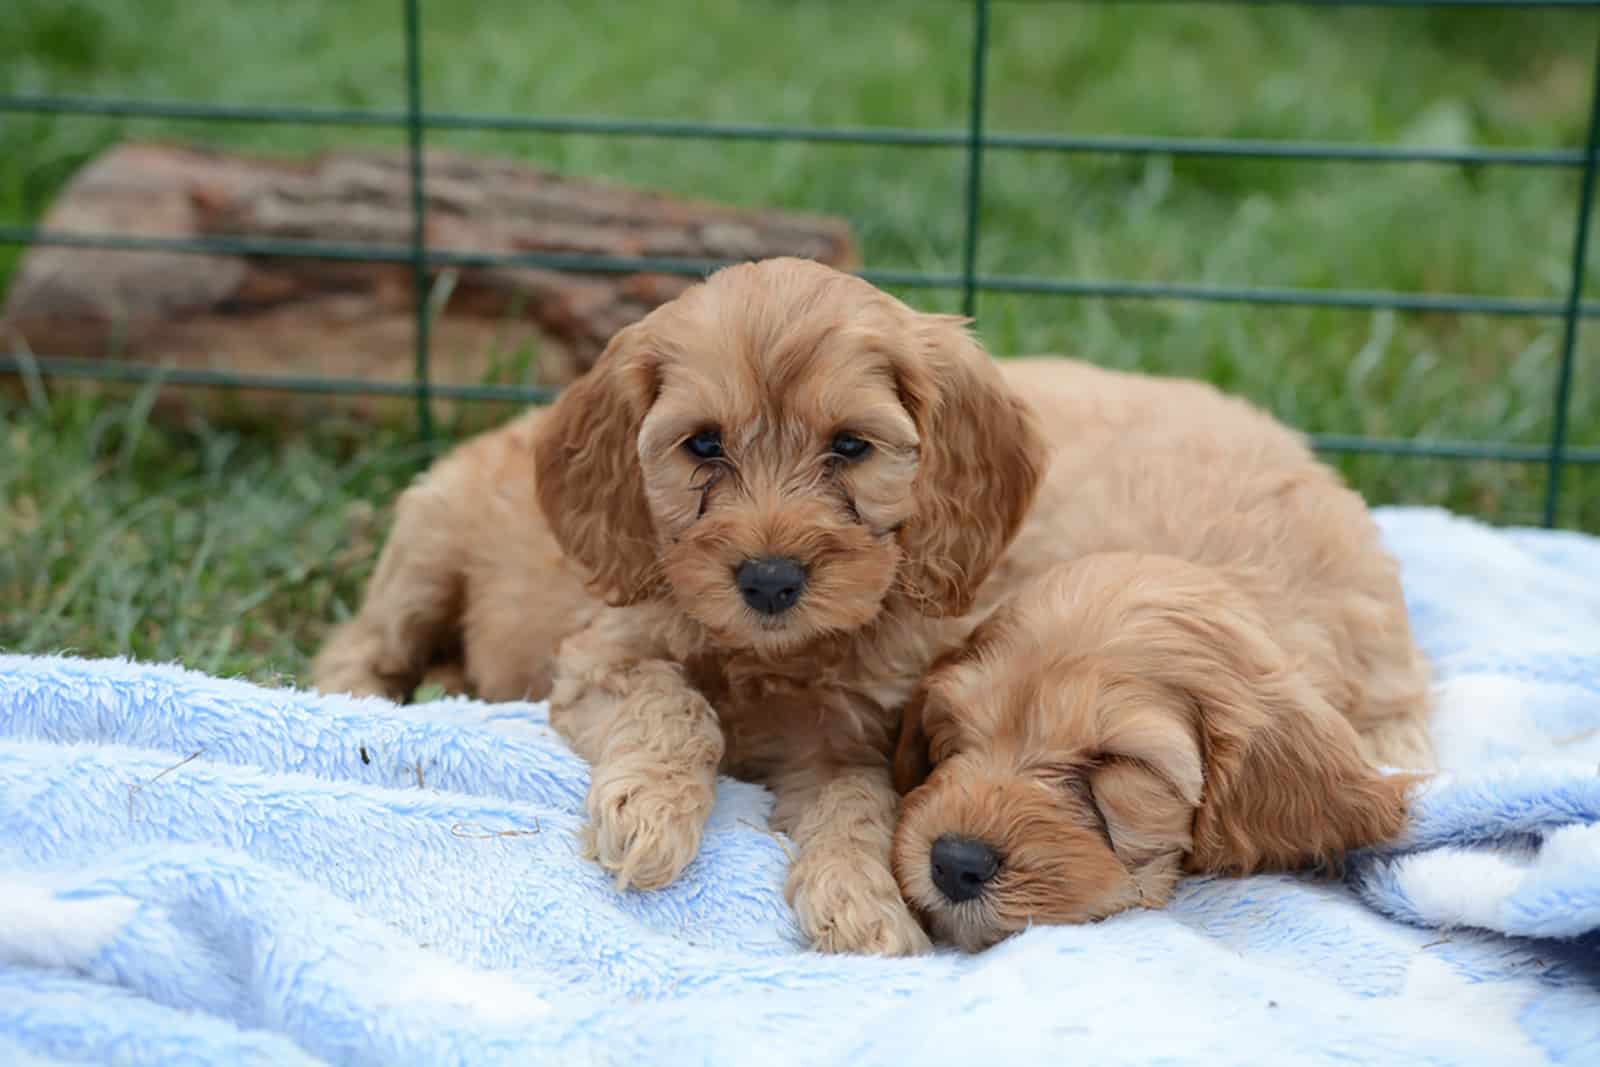 two adorable cockapoo puppies lying together